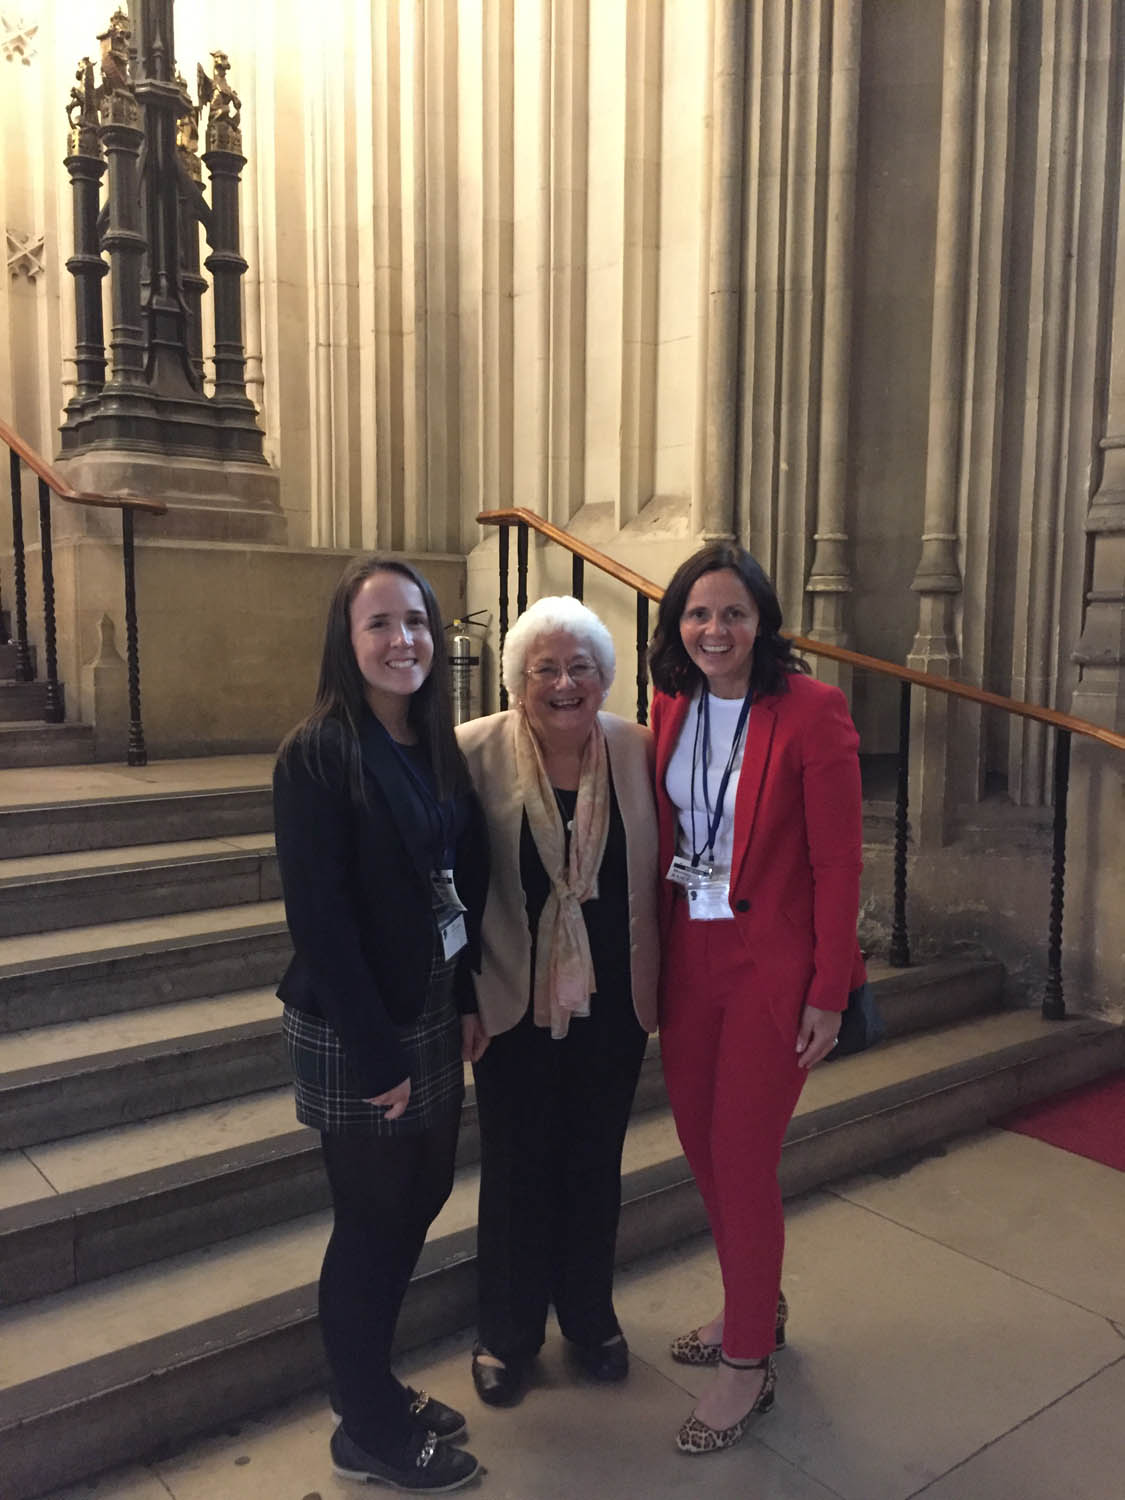 A private tour of the House of Lords by Angela Harris, Baroness Harris of Richmond